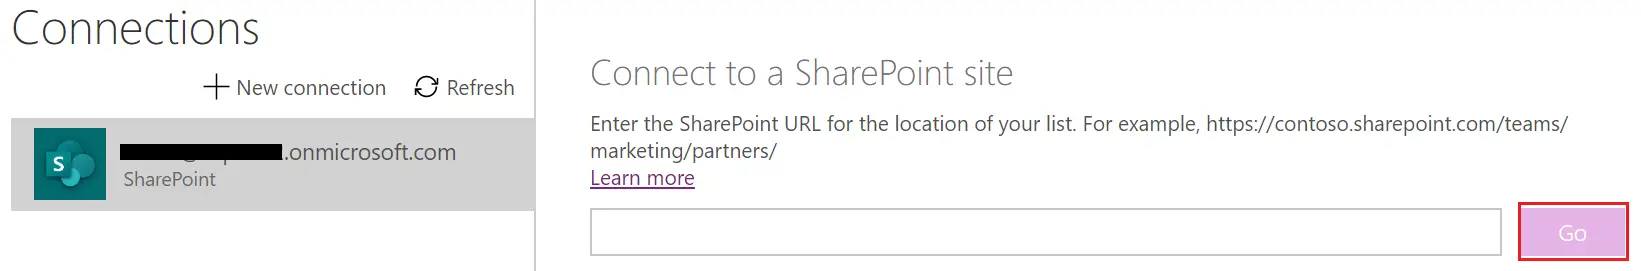 powerapp connect tosharepoint site